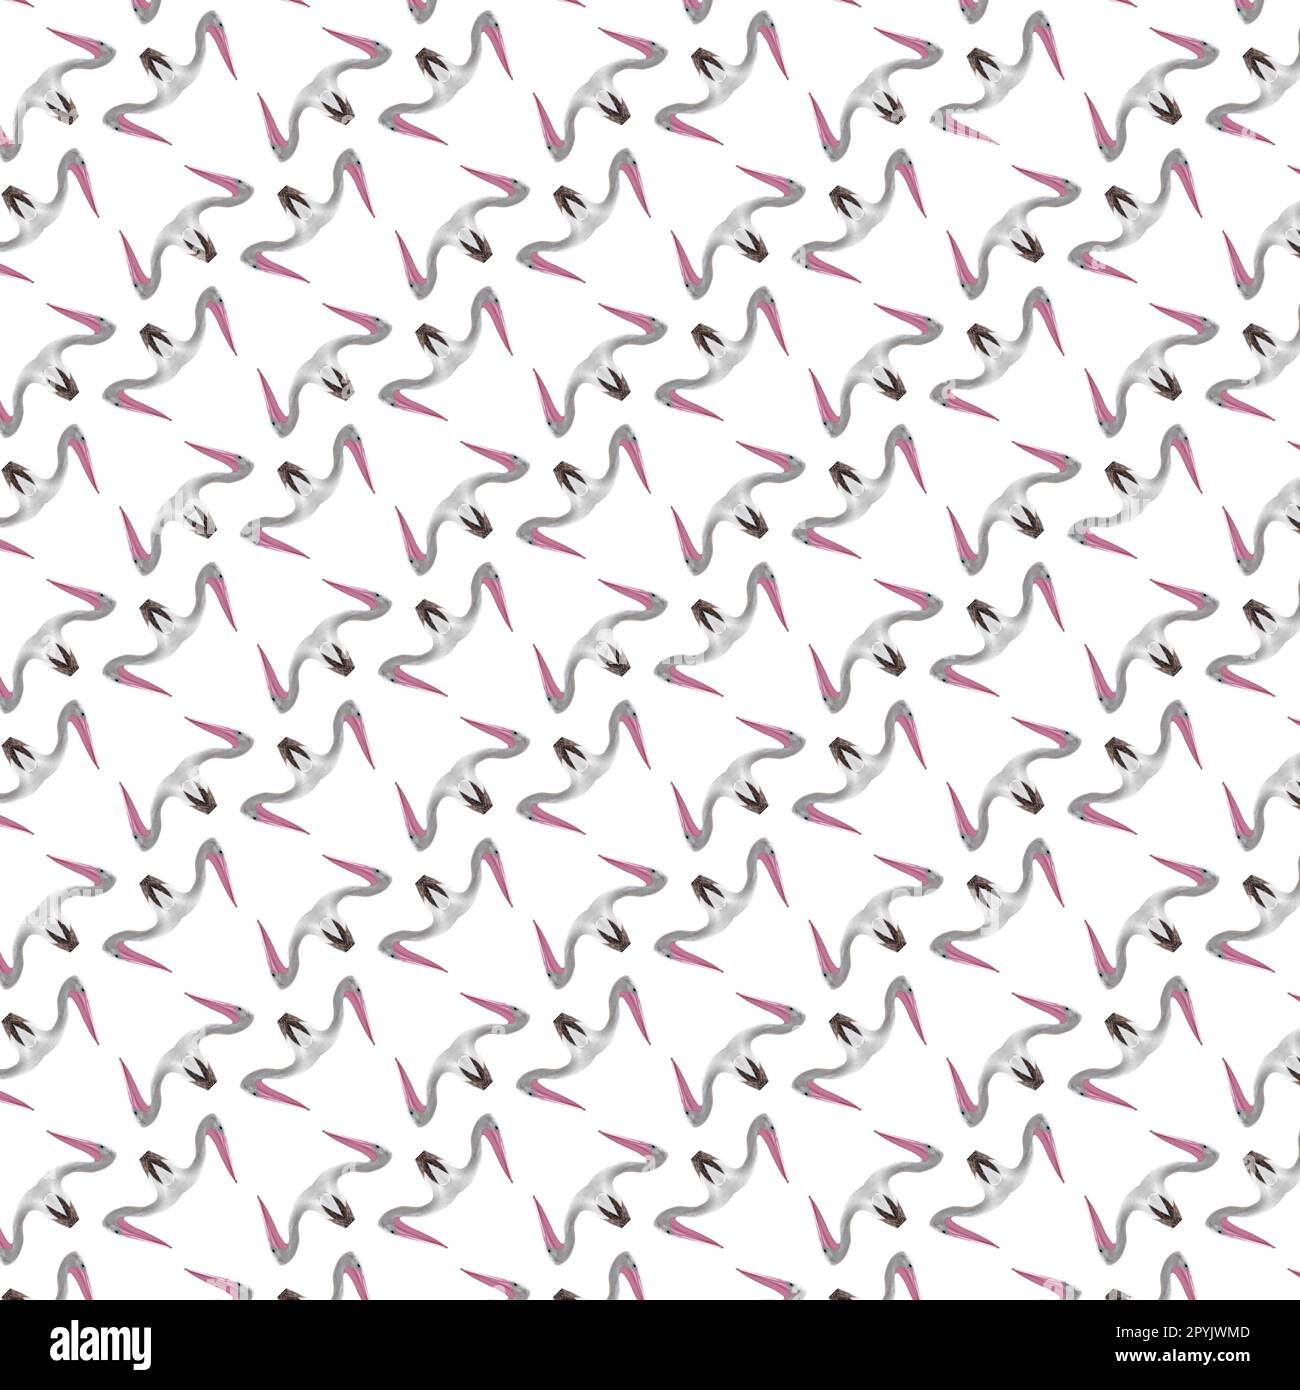 Abstract pattern of pelican birds Stock Photo